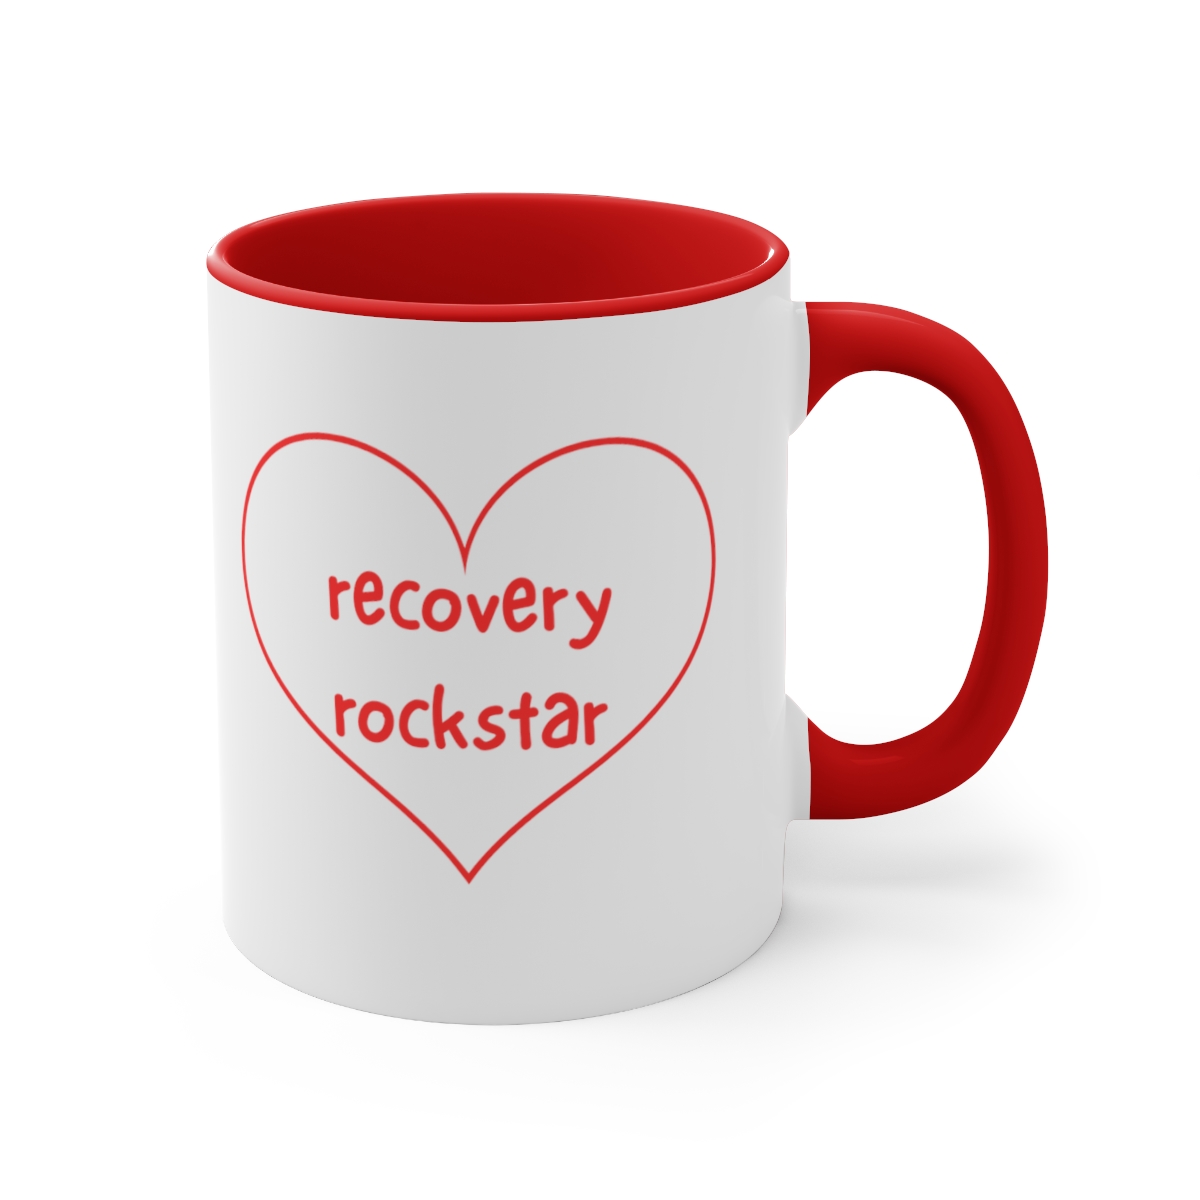 recovery rockstar - accent coffee mug, 11oz product thumbnail image